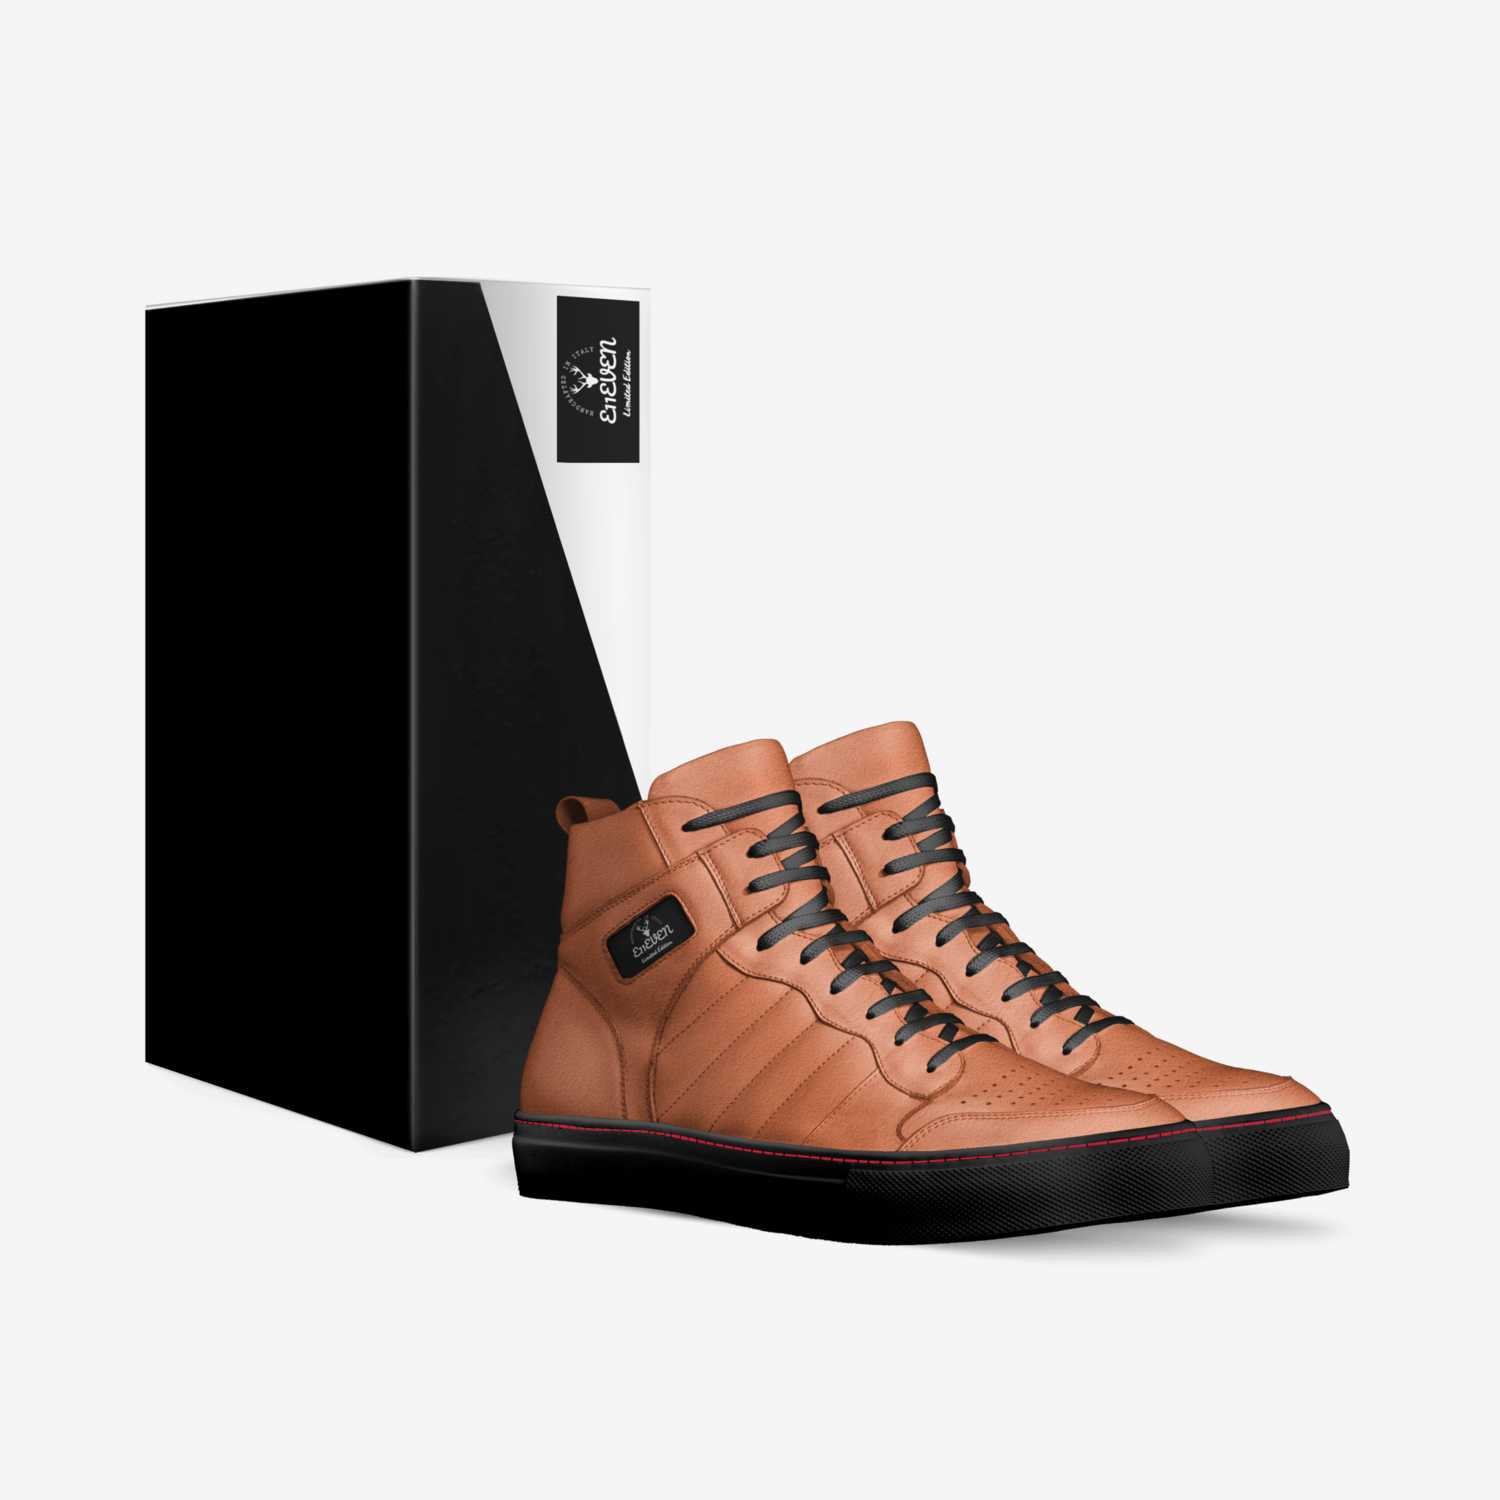 E11EVEN custom made in Italy shoes by Garren Hassler | Box view